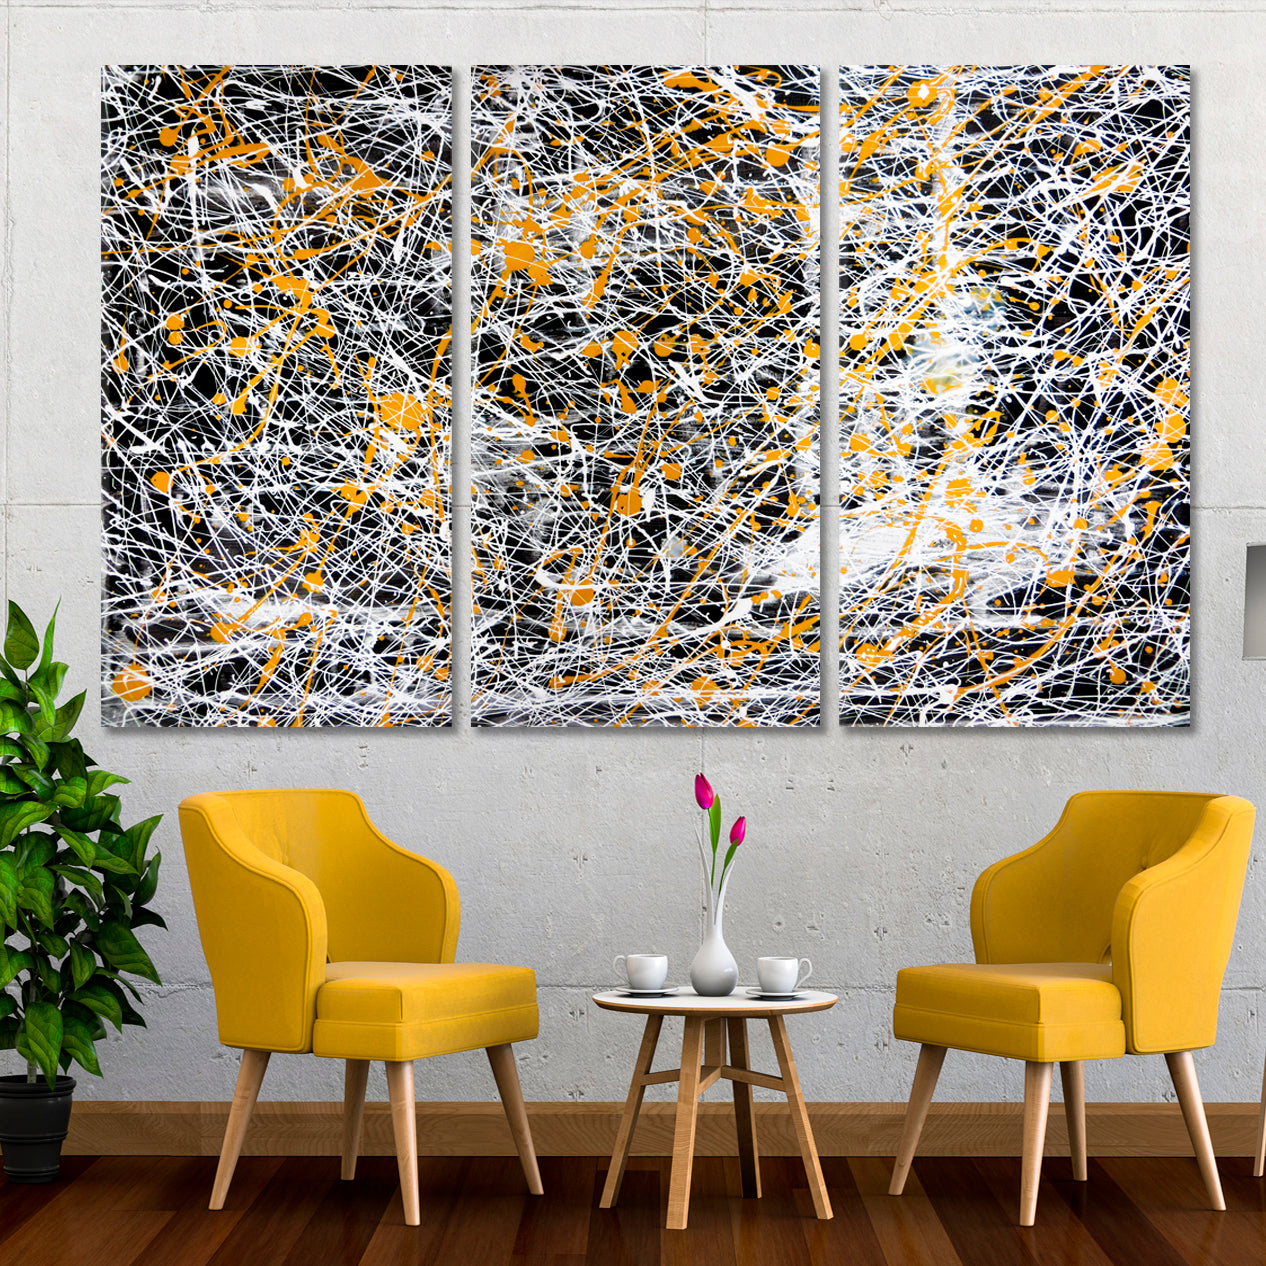 Abstract Drip White Black Yellow Modern Expressionist Contemporary Art Artesty 3 panels 36" x 24" 